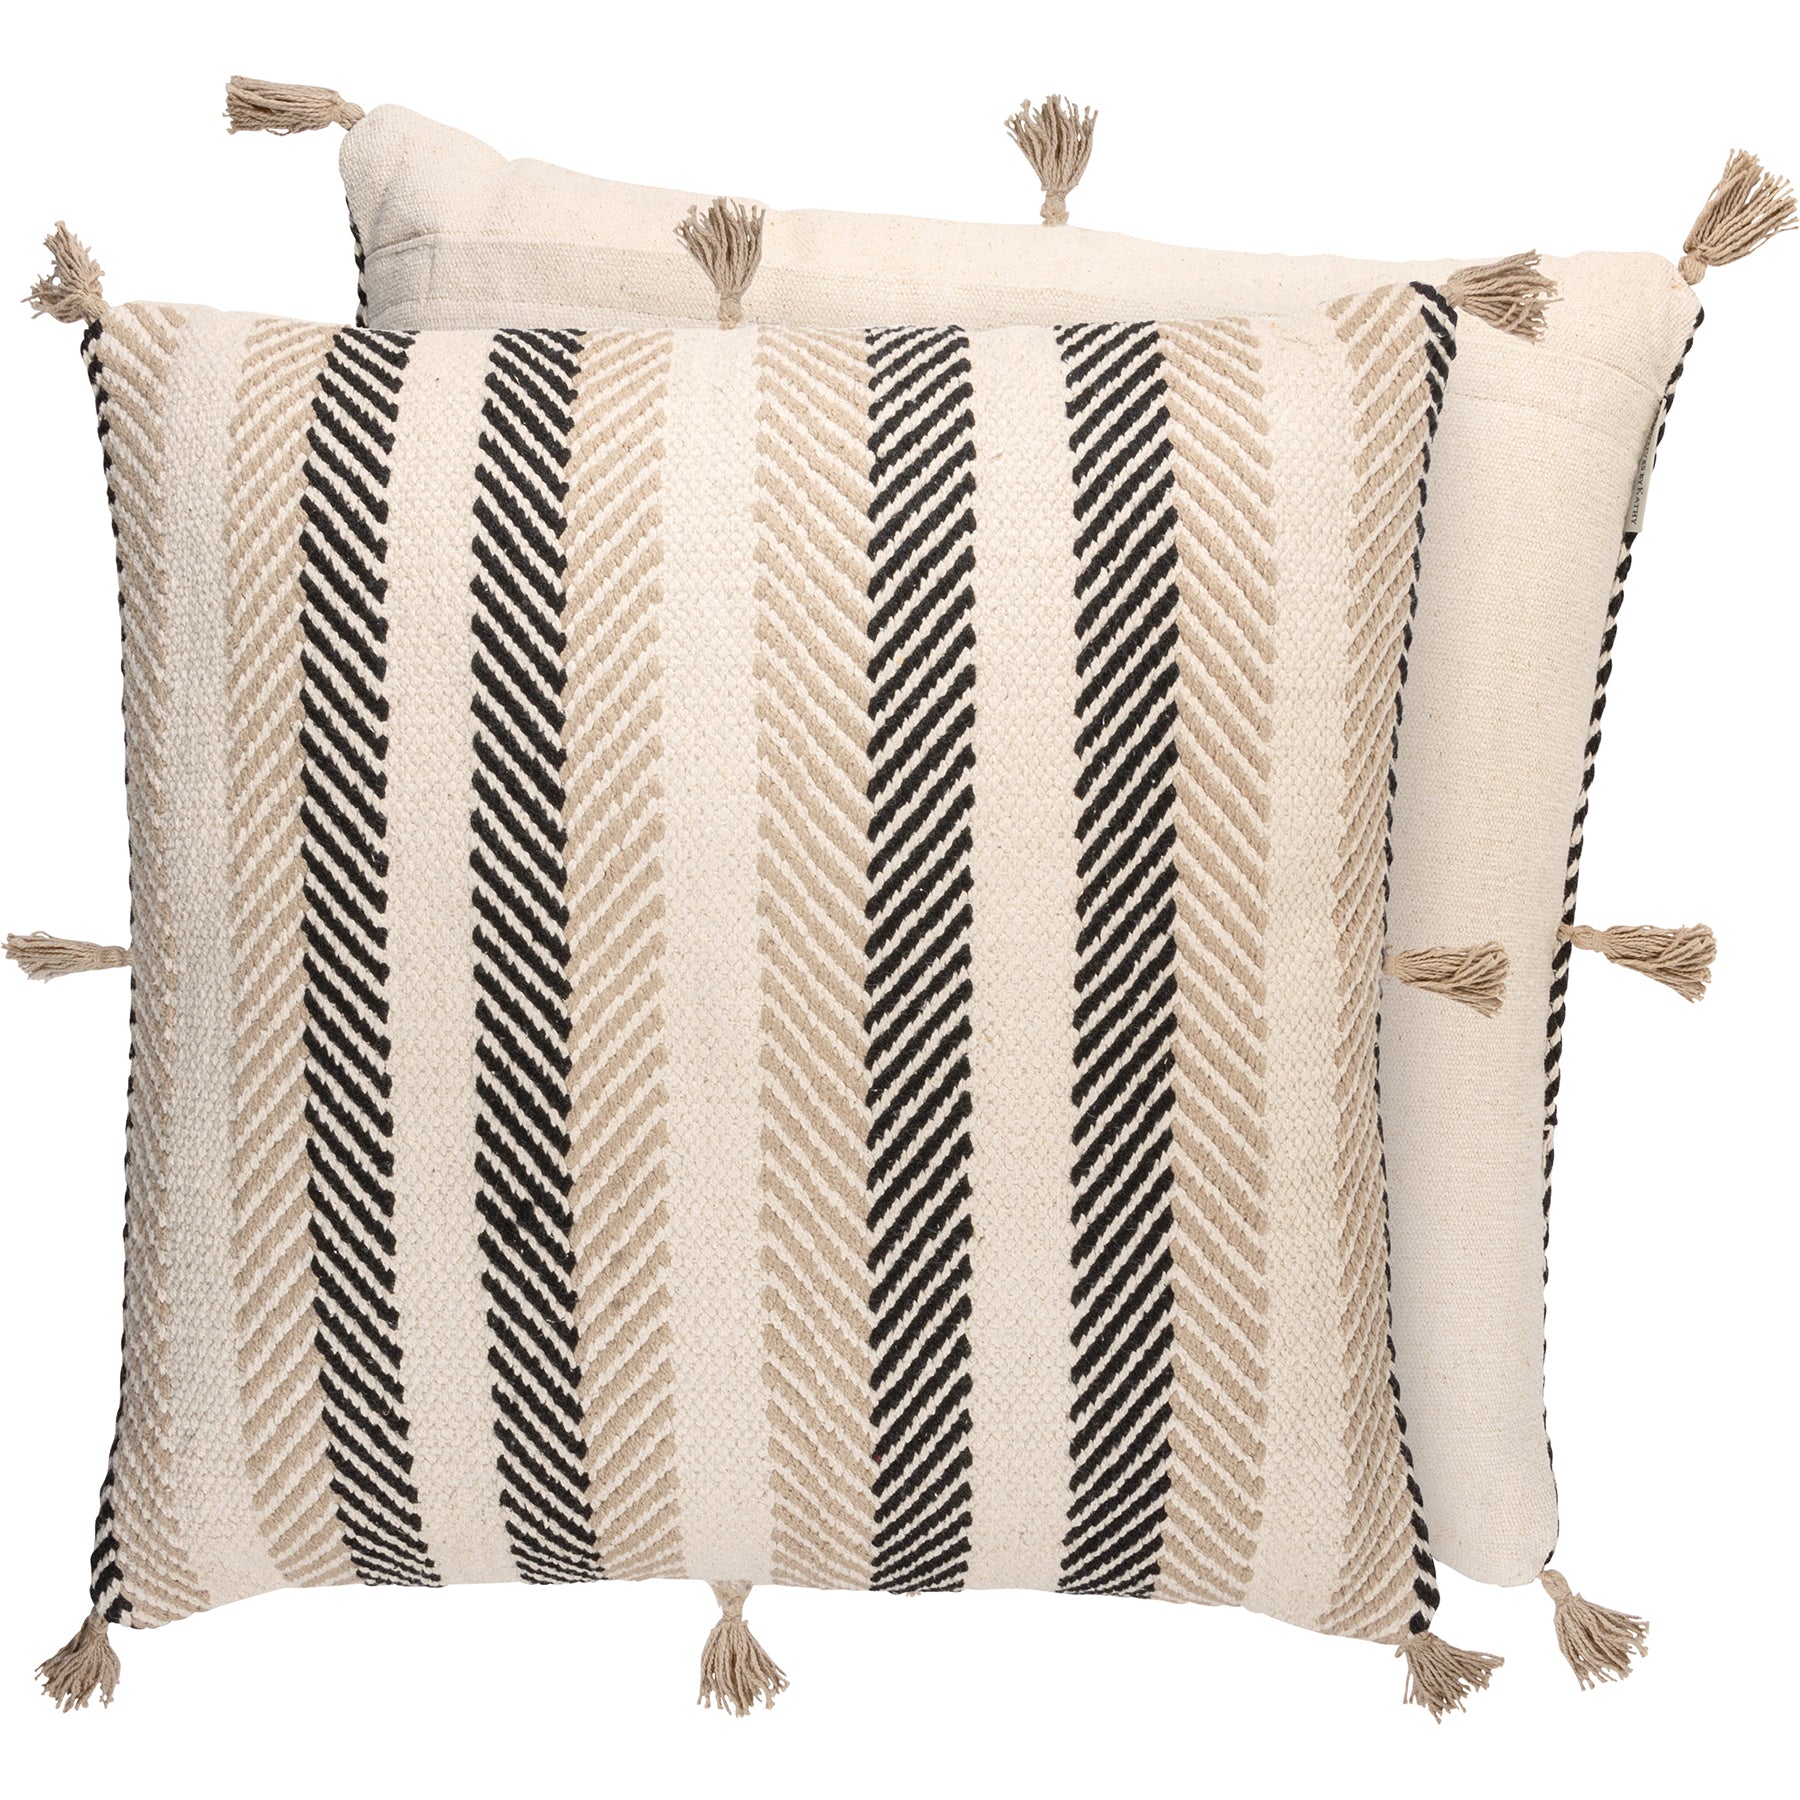 Bohemian style accent pillow